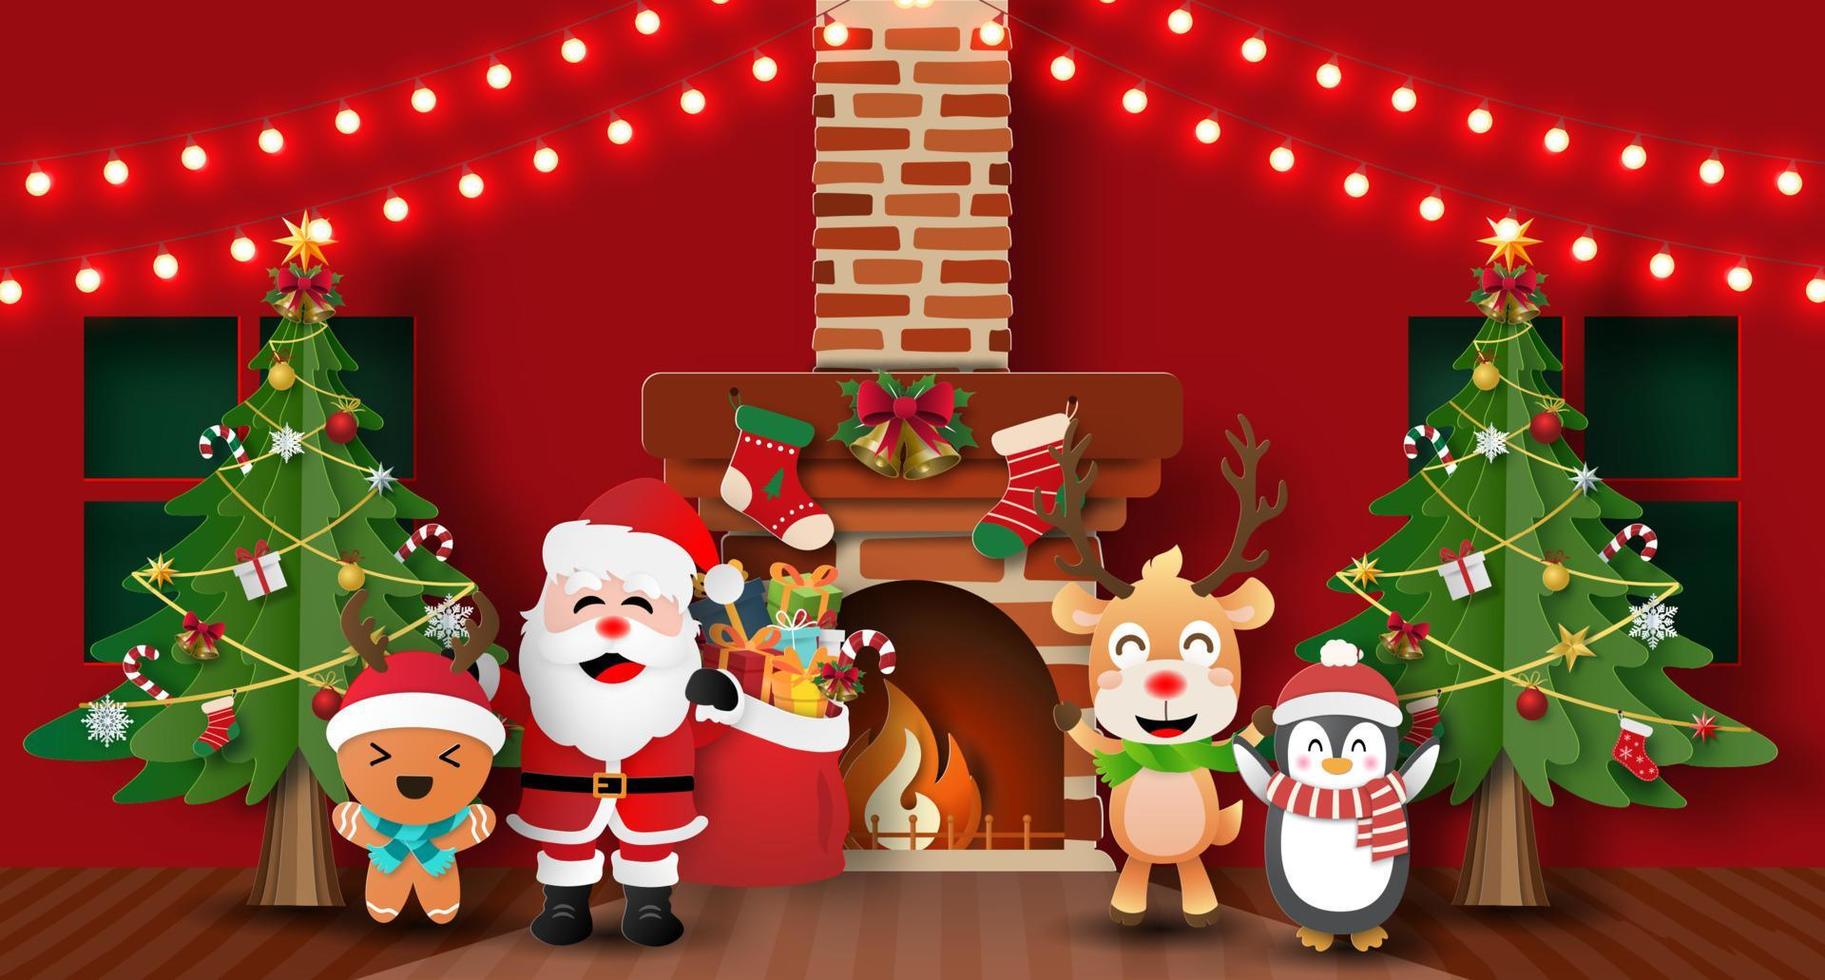 Paper art, Craft style of Christmas party with Santa Claus and friends in home, Merry Christmas and Happy New Year vector